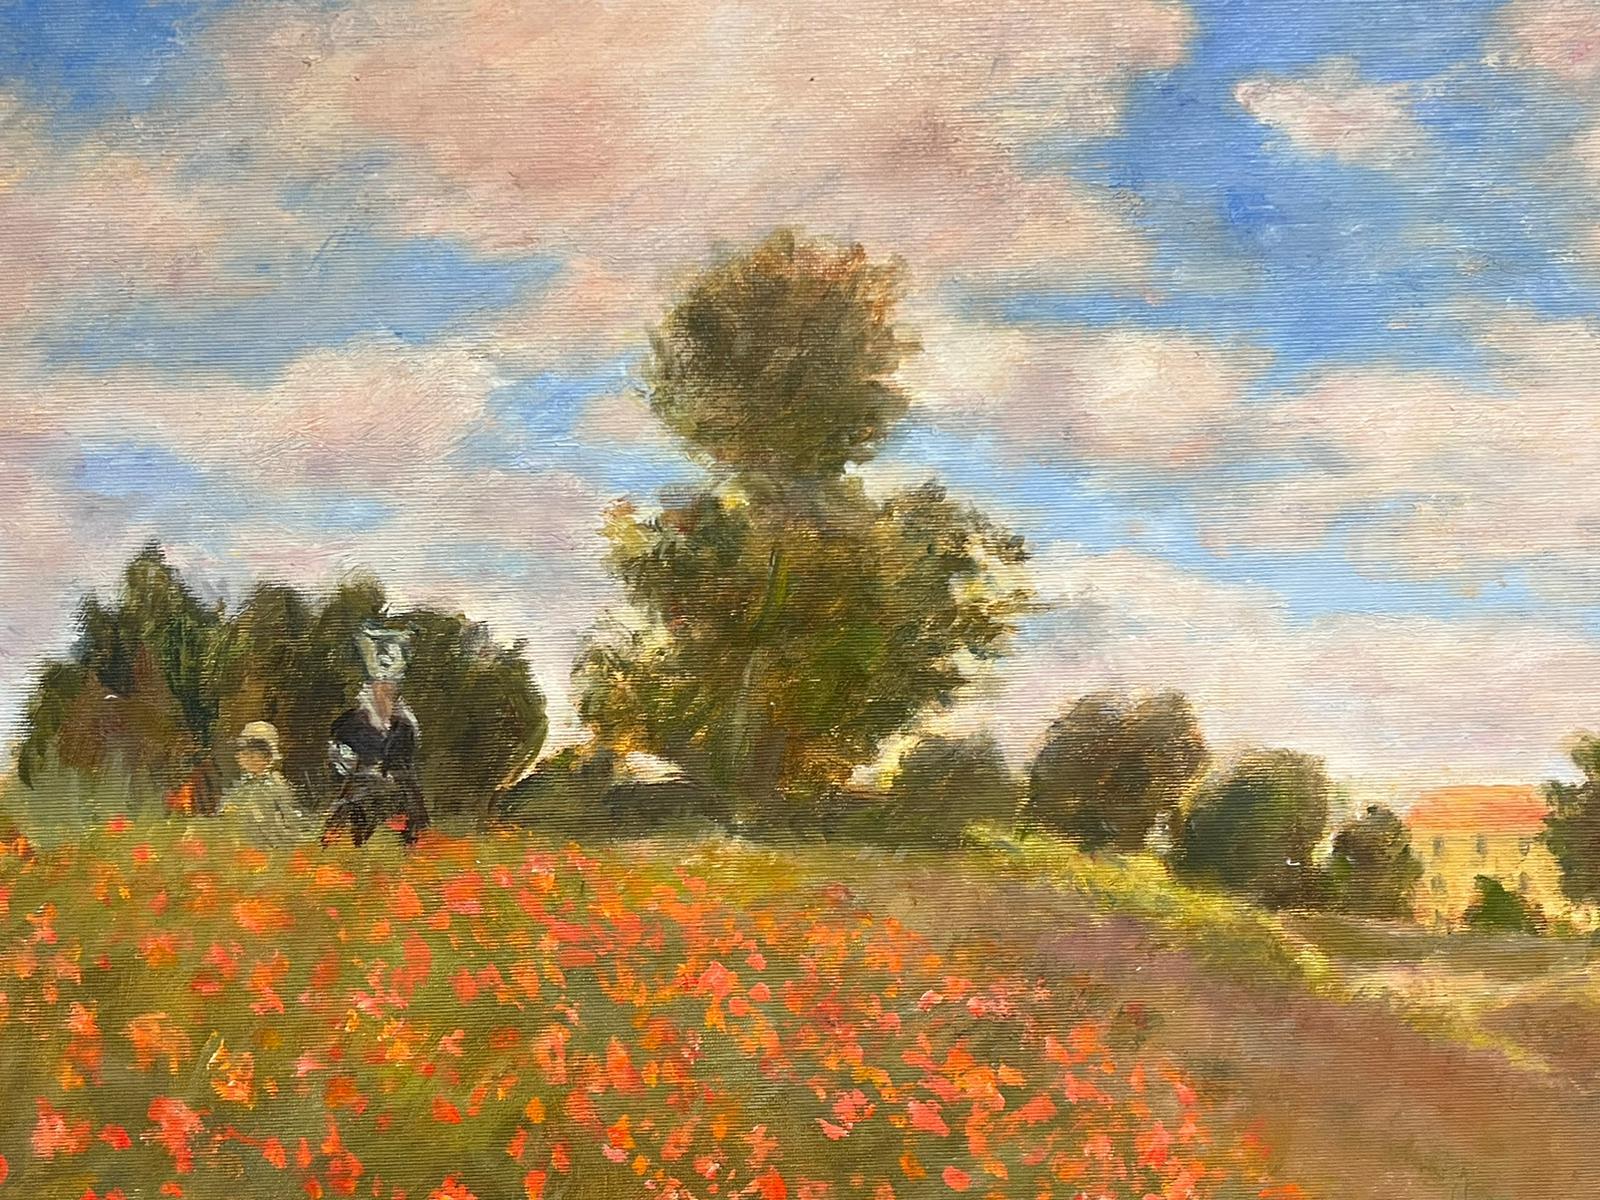 Walking in the Poppy Field
French Impressionist school, 20th century
after Claude Monet's work
oil on board, framed 
framed: 27.5 x 34 inches
board: 23 x 30 inches
provenance: private collection, United Kingdom
condition: very good and sound